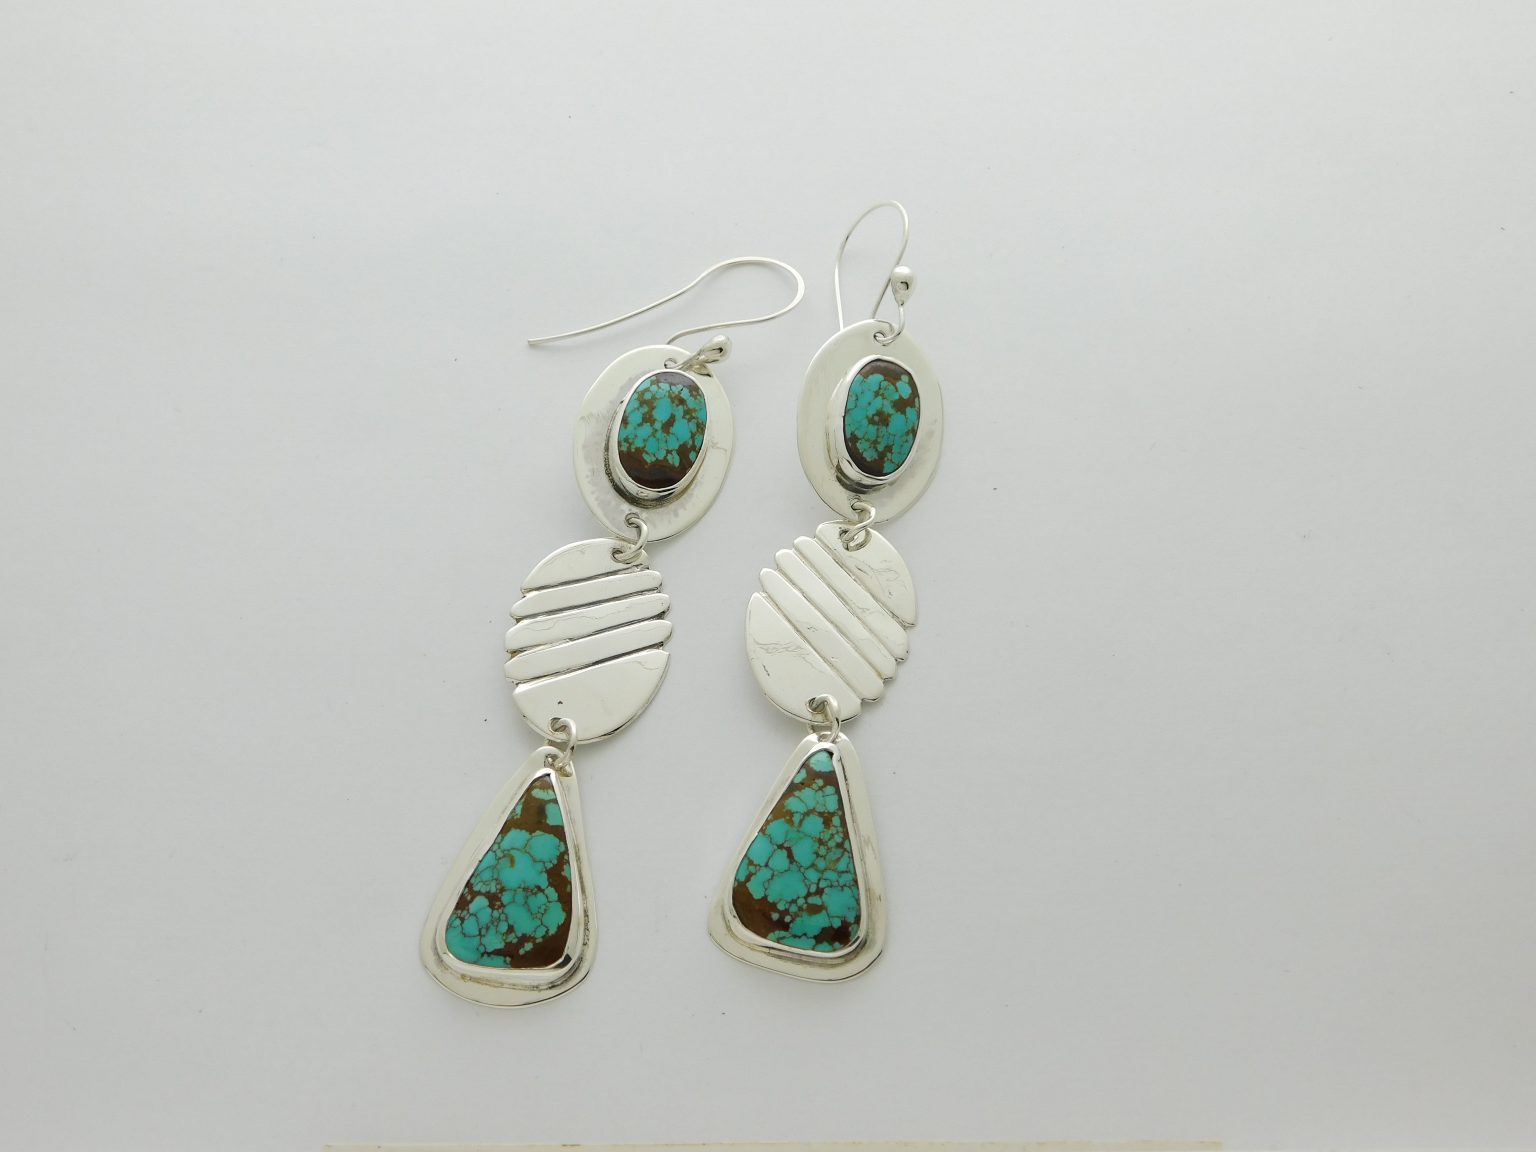 JAMES FENDENHEIM Tohono O'odham No. 8 Turquoise and Sterling Silver 3-Stack Disc Earrings